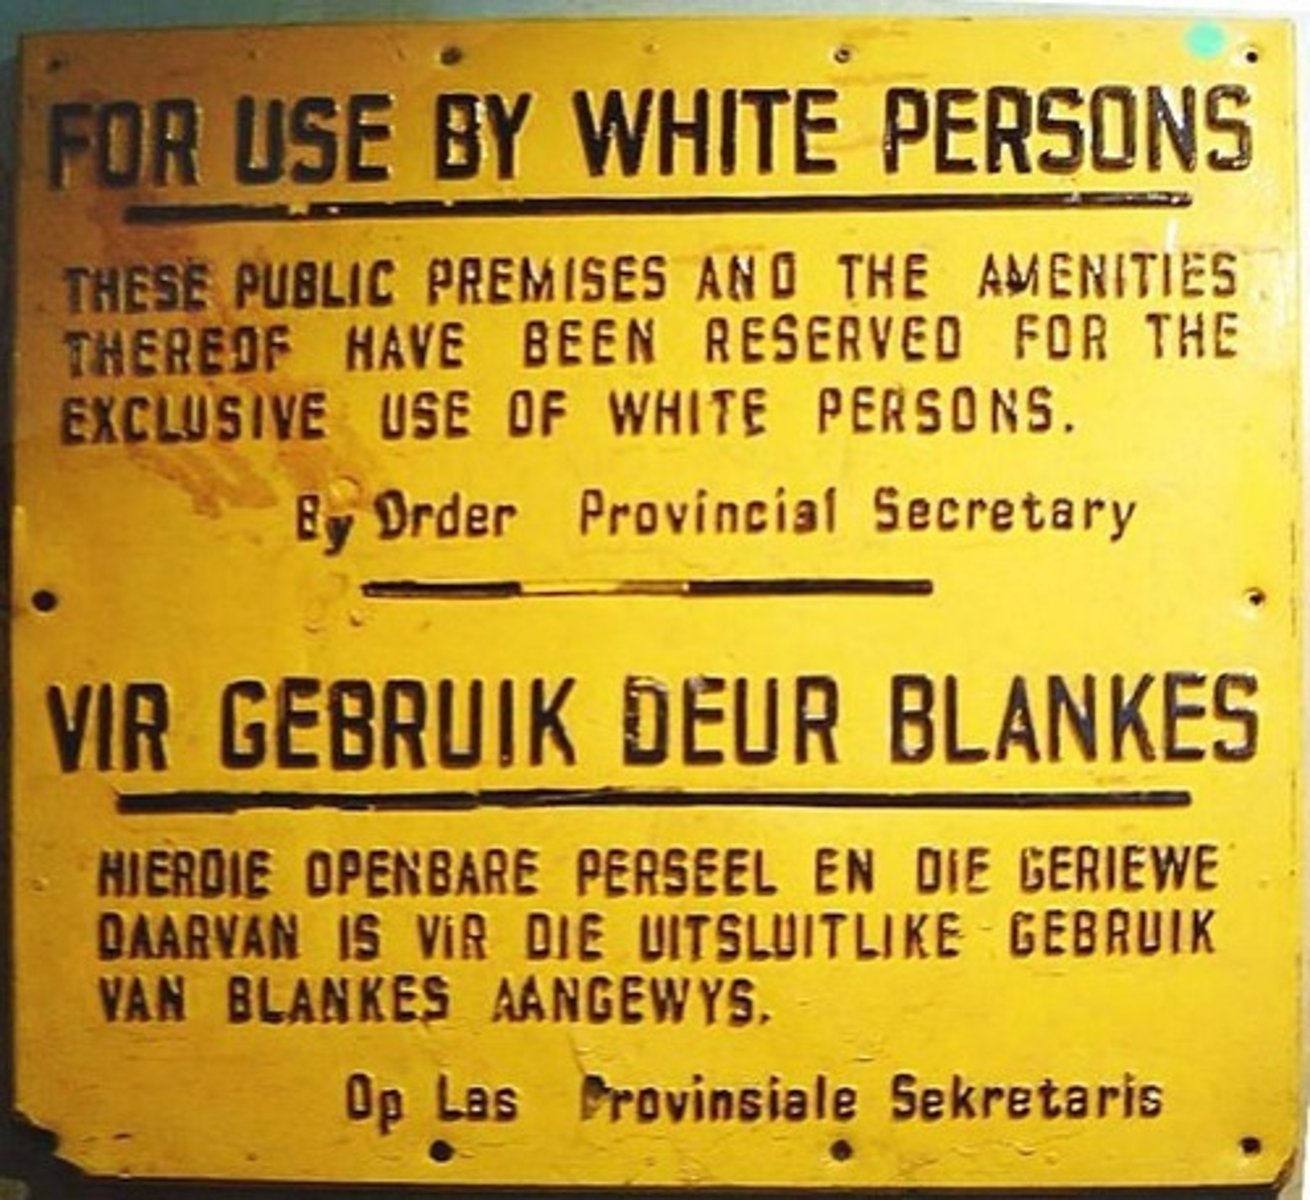 <p>Ensured signs were put up in public places saying 'Europeans Only' in the white areas and 'Non-Europeans Only' in the areas designated for black people or coloureds. These signs were put up everywhere, including train stations, post offices, parks, and beaches. The best facilities and services were reserved for white people.</p>